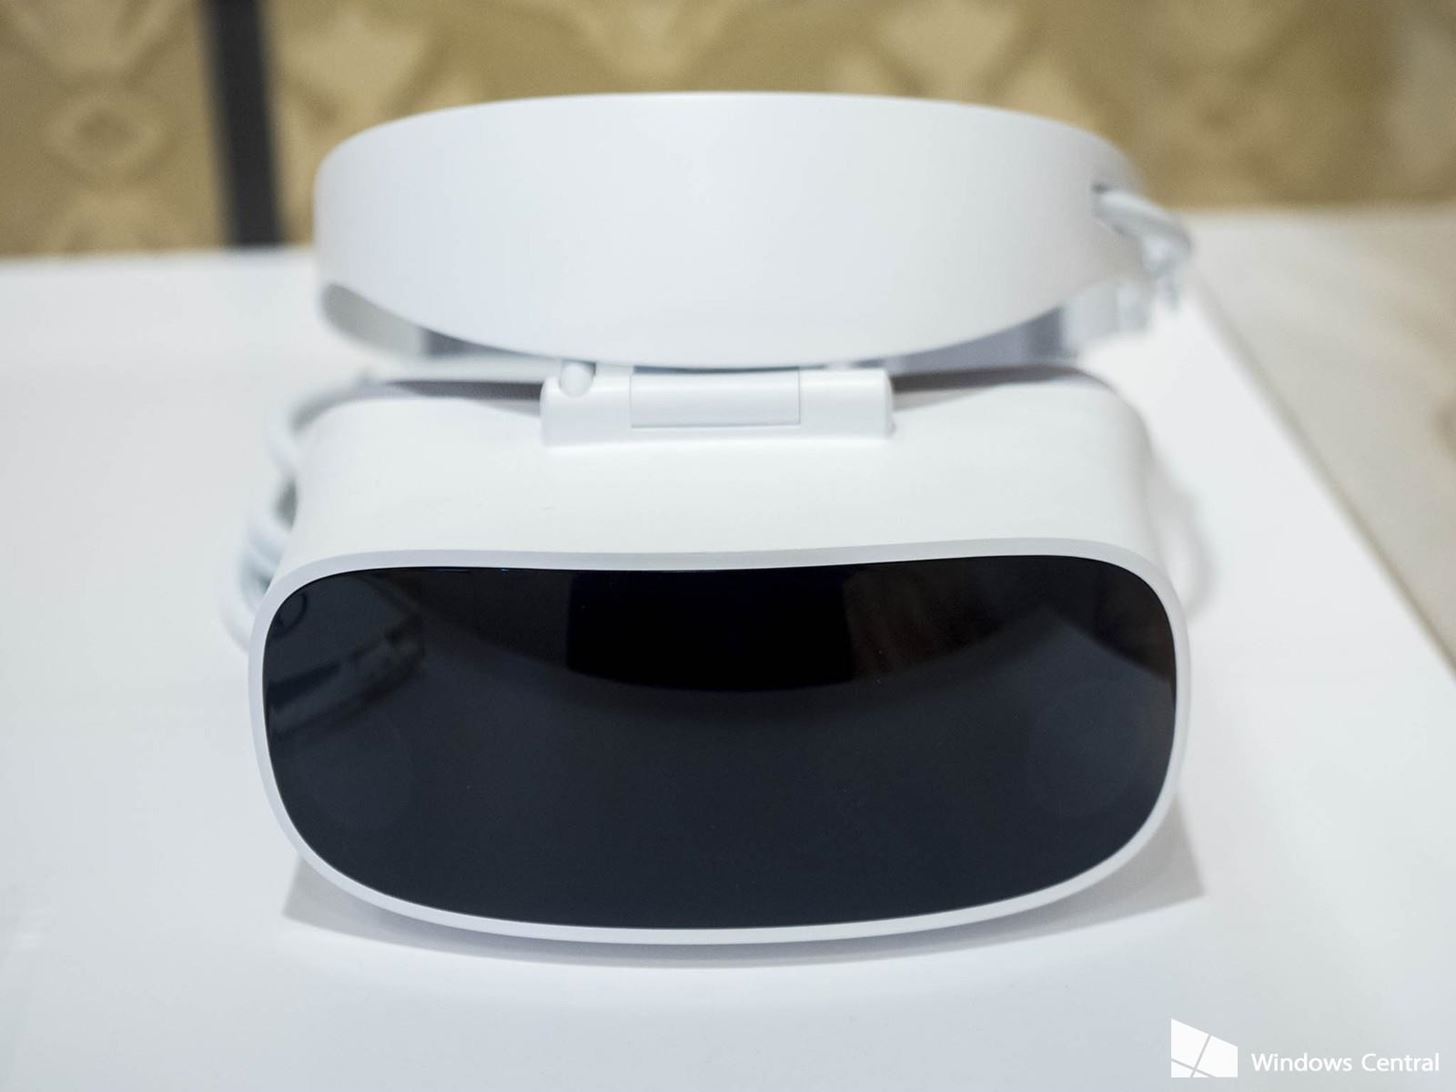 Five Windows Holographic Mixed Reality Headsets Have Now Been Seen, but Most Have Not Been Touched